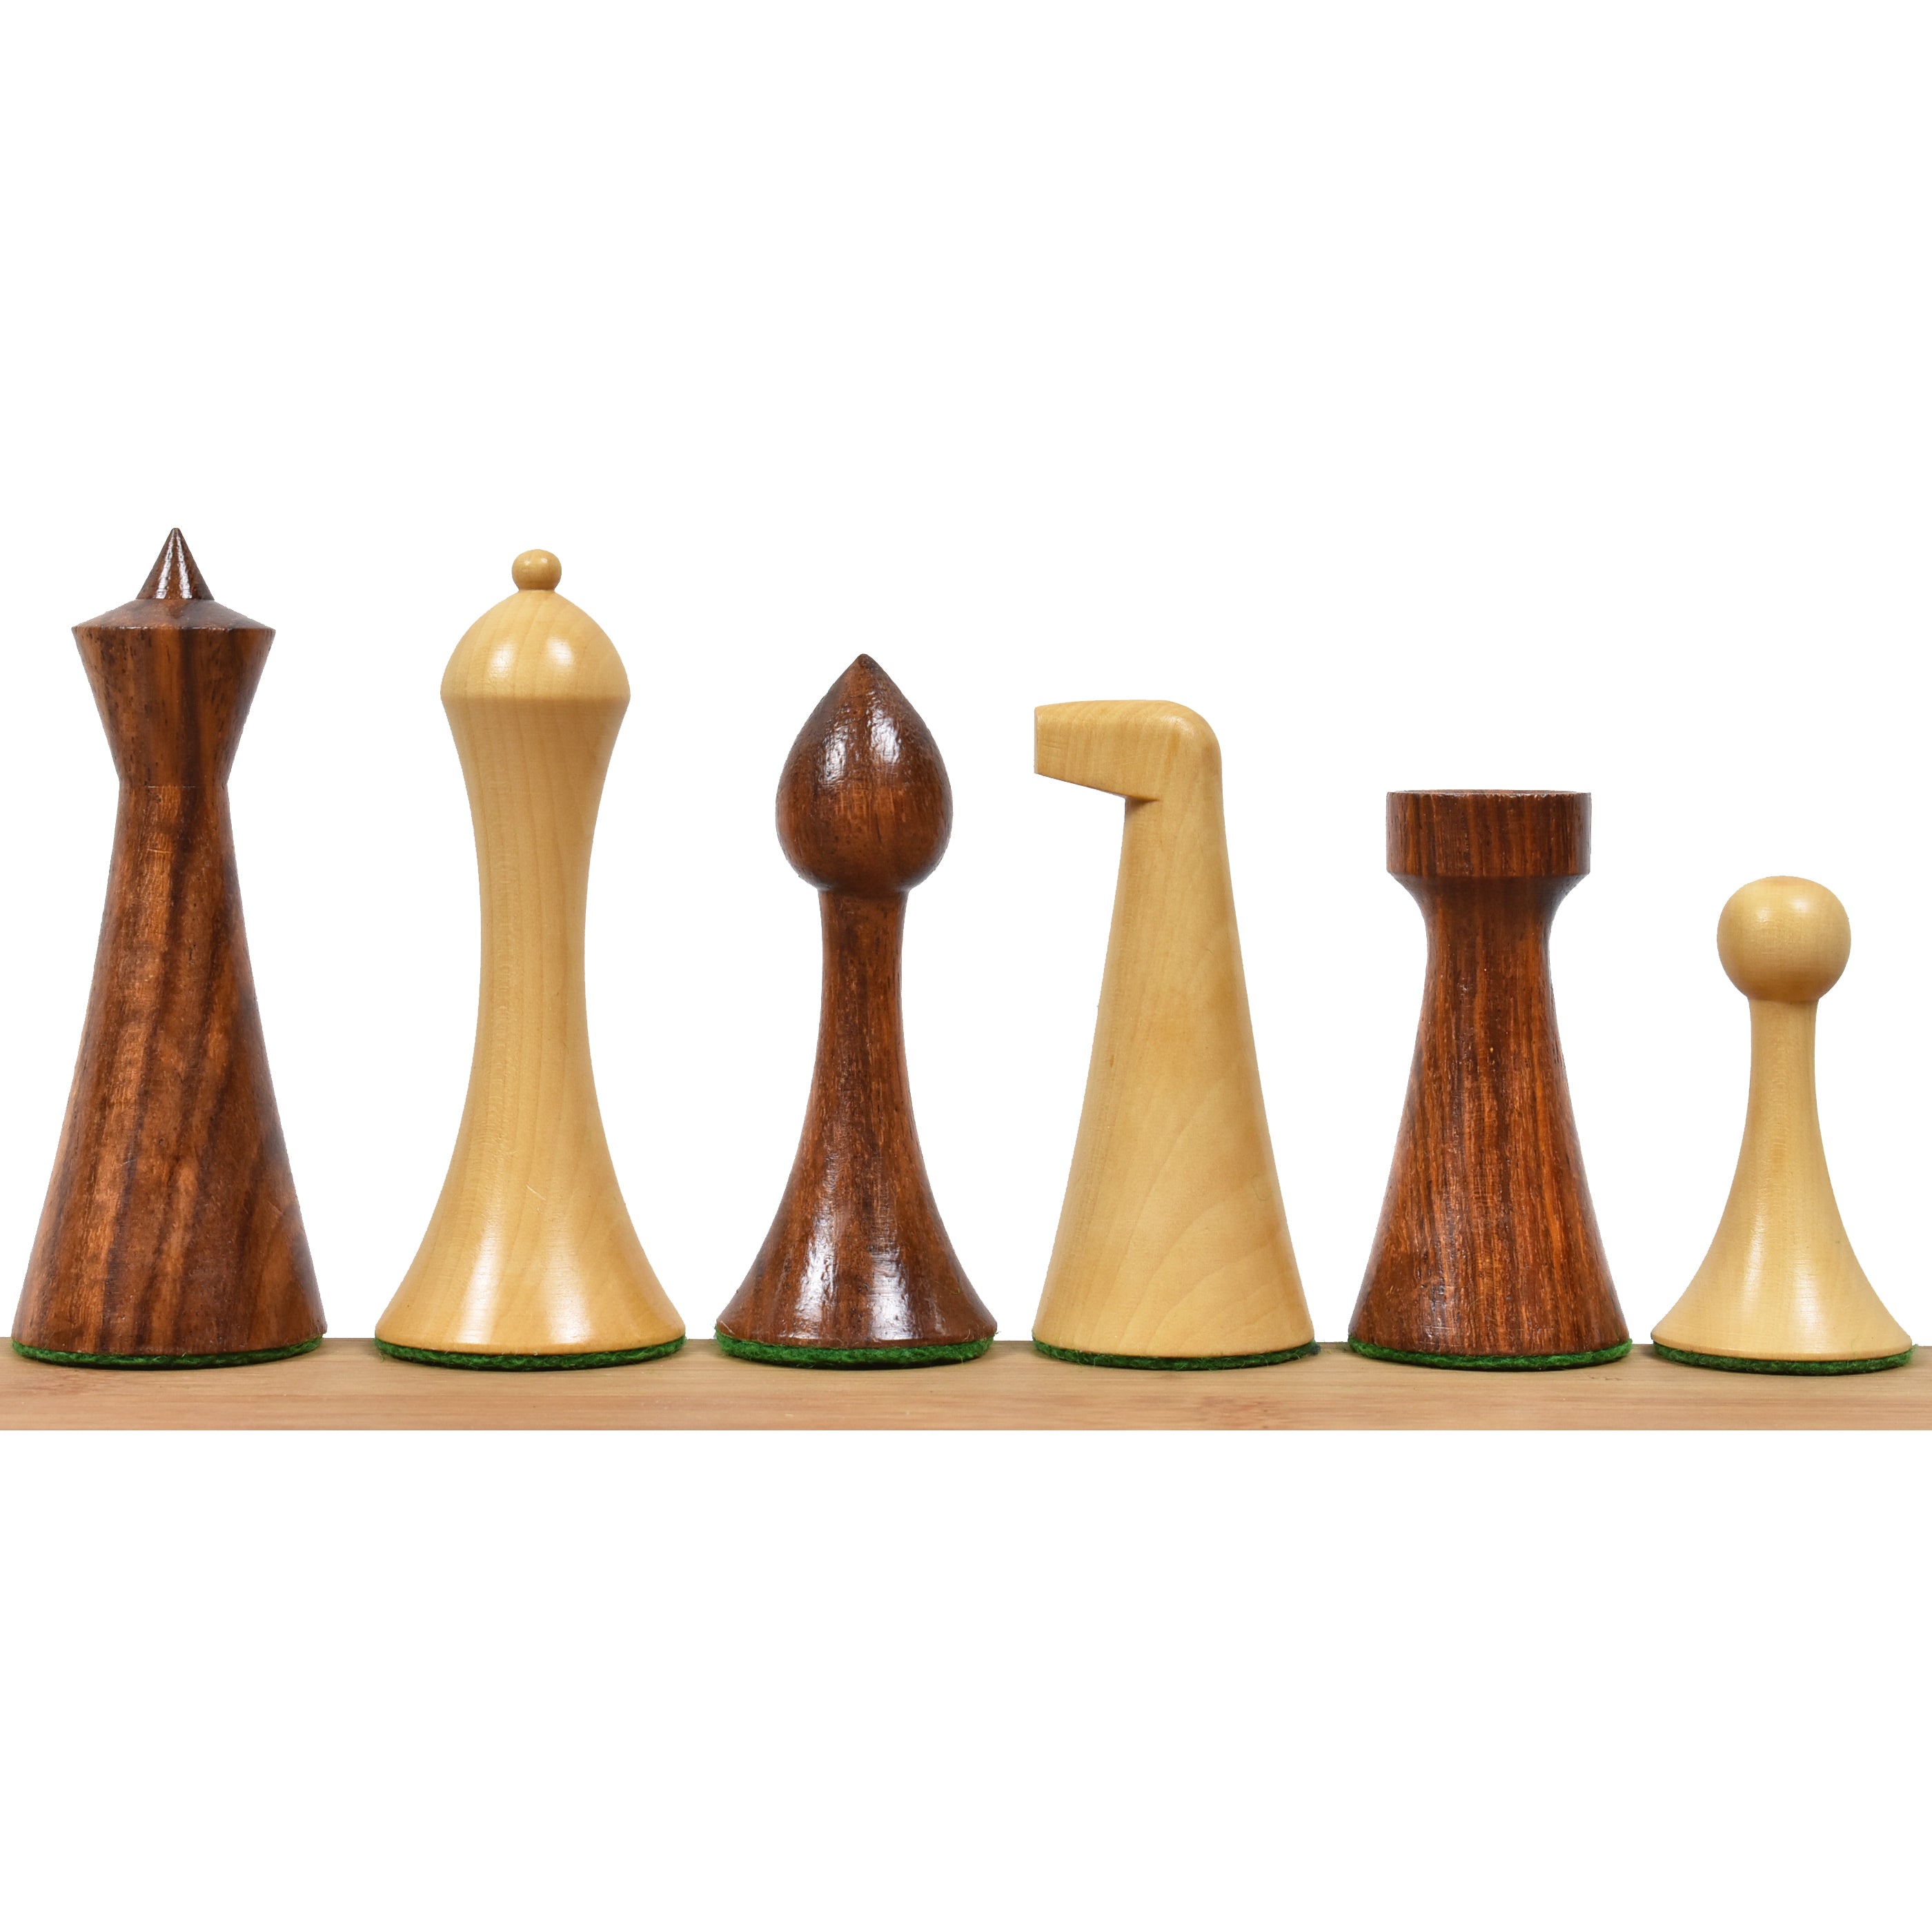 3.6" Herman Ohme Minimalist Combo Chess Set - Pieces in Weighted Golden Rosewood with Board & Box